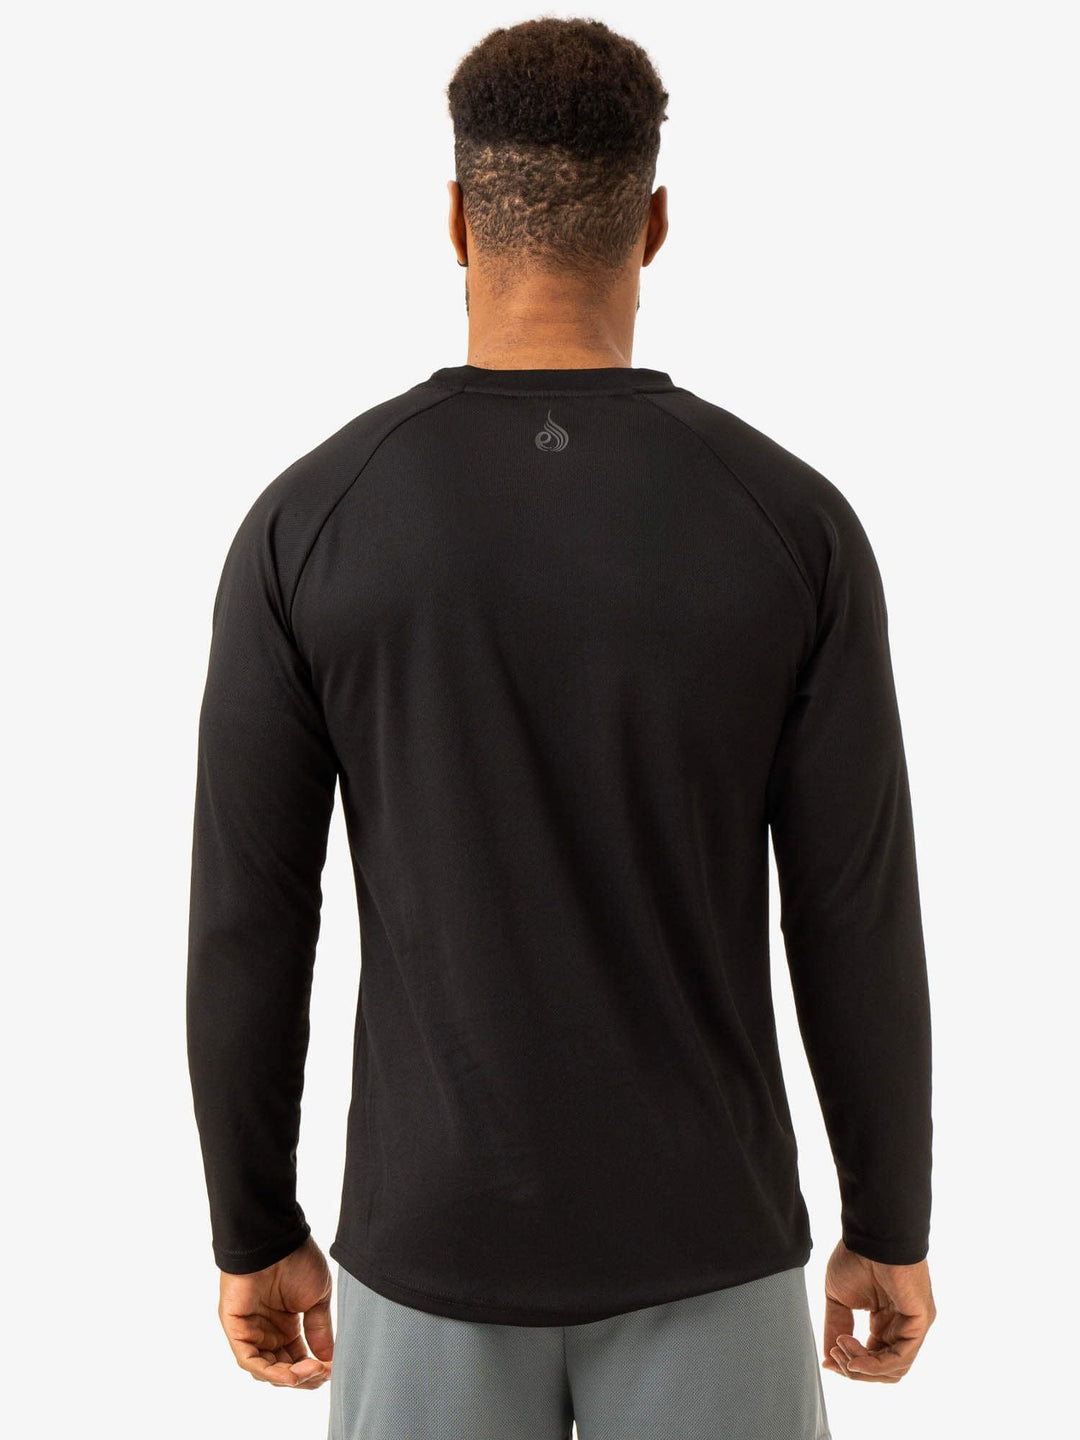 Overdrive Long Sleeve Top - Black Clothing Ryderwear 